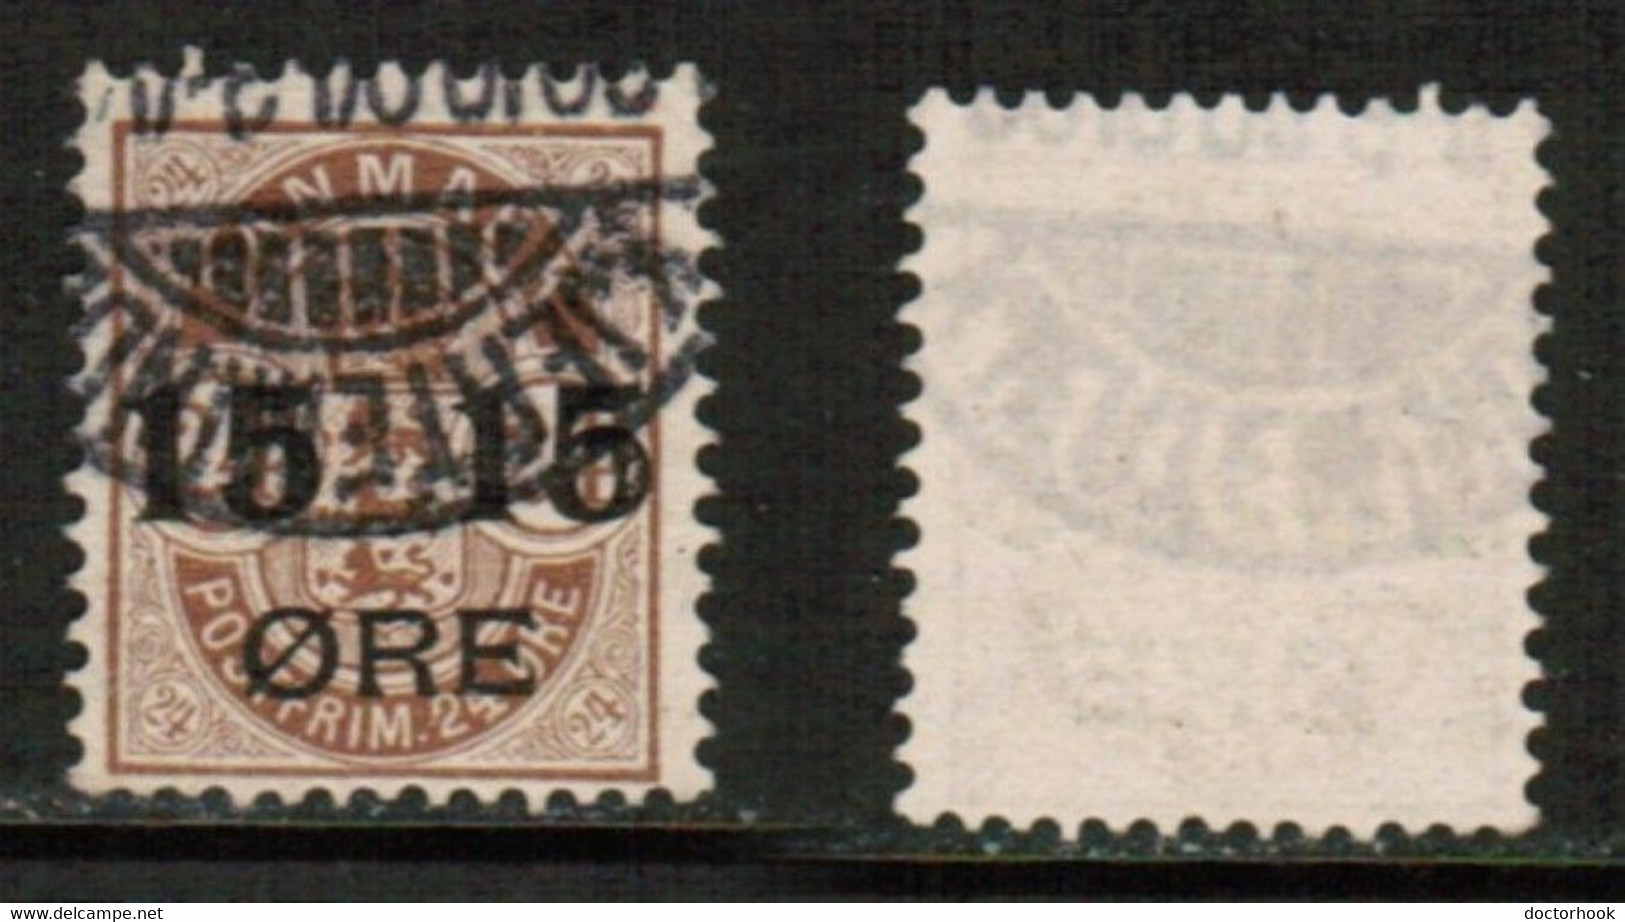 DENMARK   Scott # 56 USED (CONDITION AS PER SCAN) (Stamp Scan # 864-3) - Used Stamps